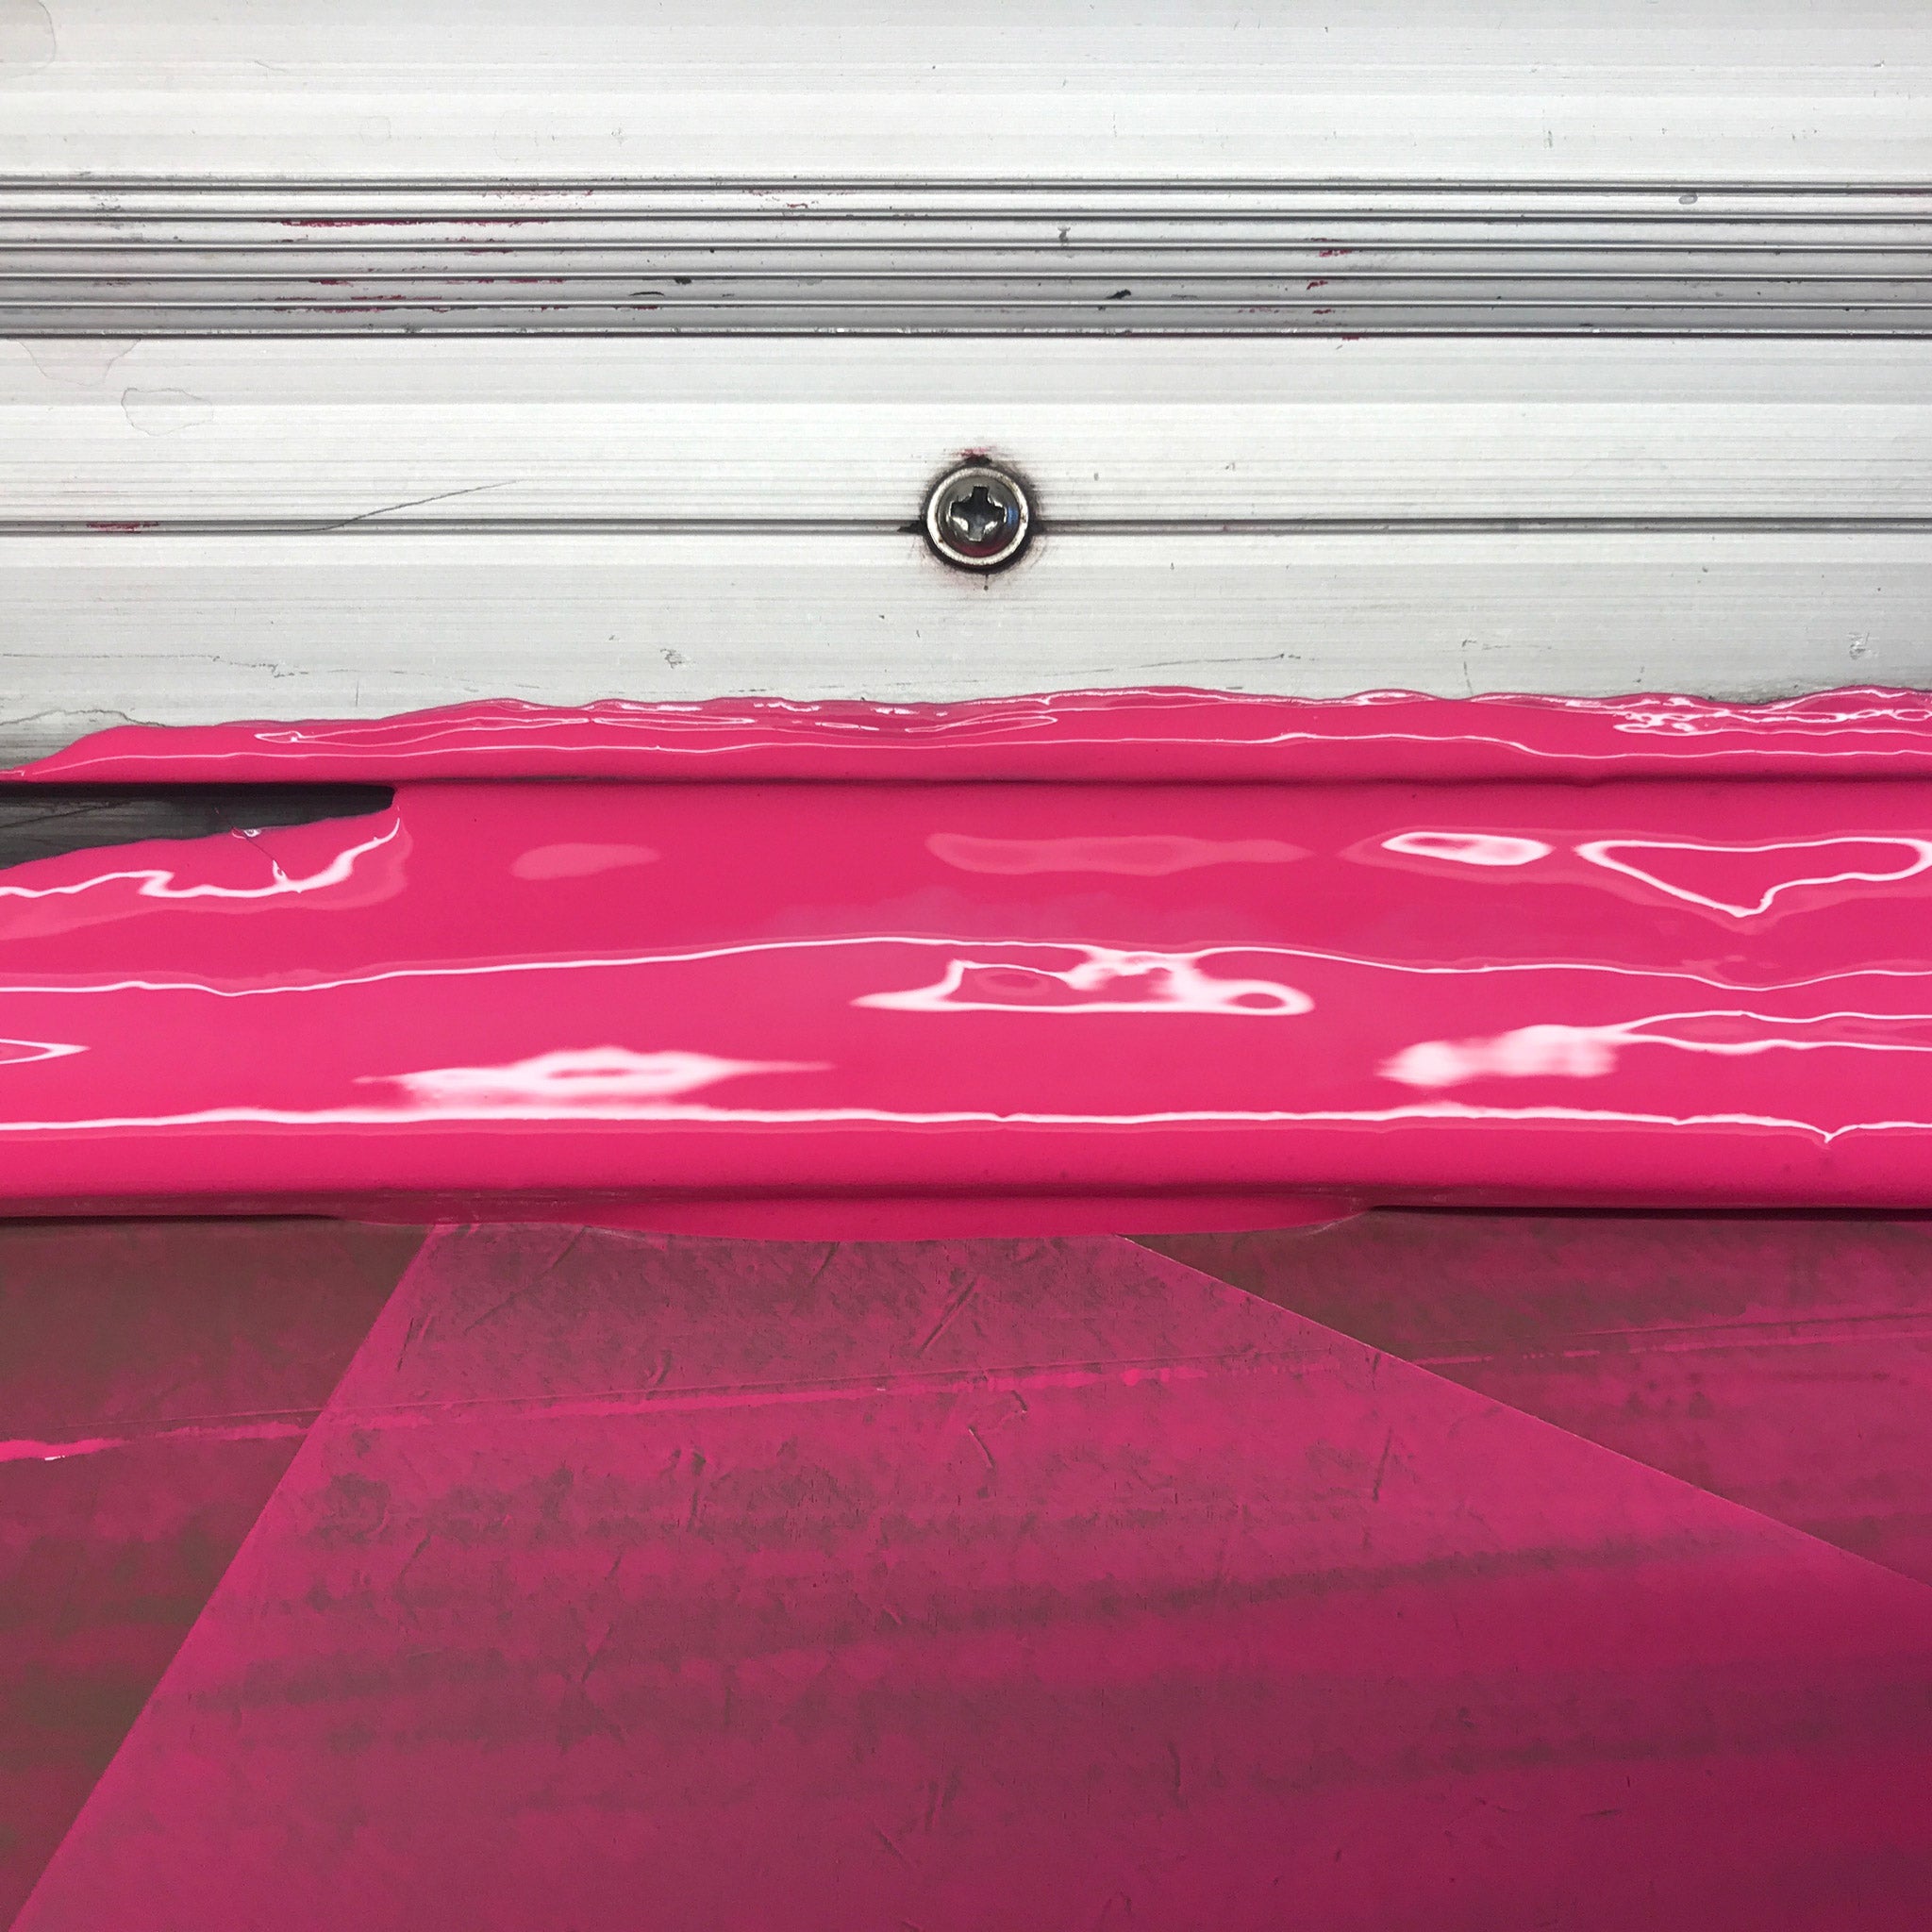 Extreme close up of a screenprinting squeegee loaded with bright pink ink. Aluminium at the top, a bolt and then a shiny expanse of pink ink.